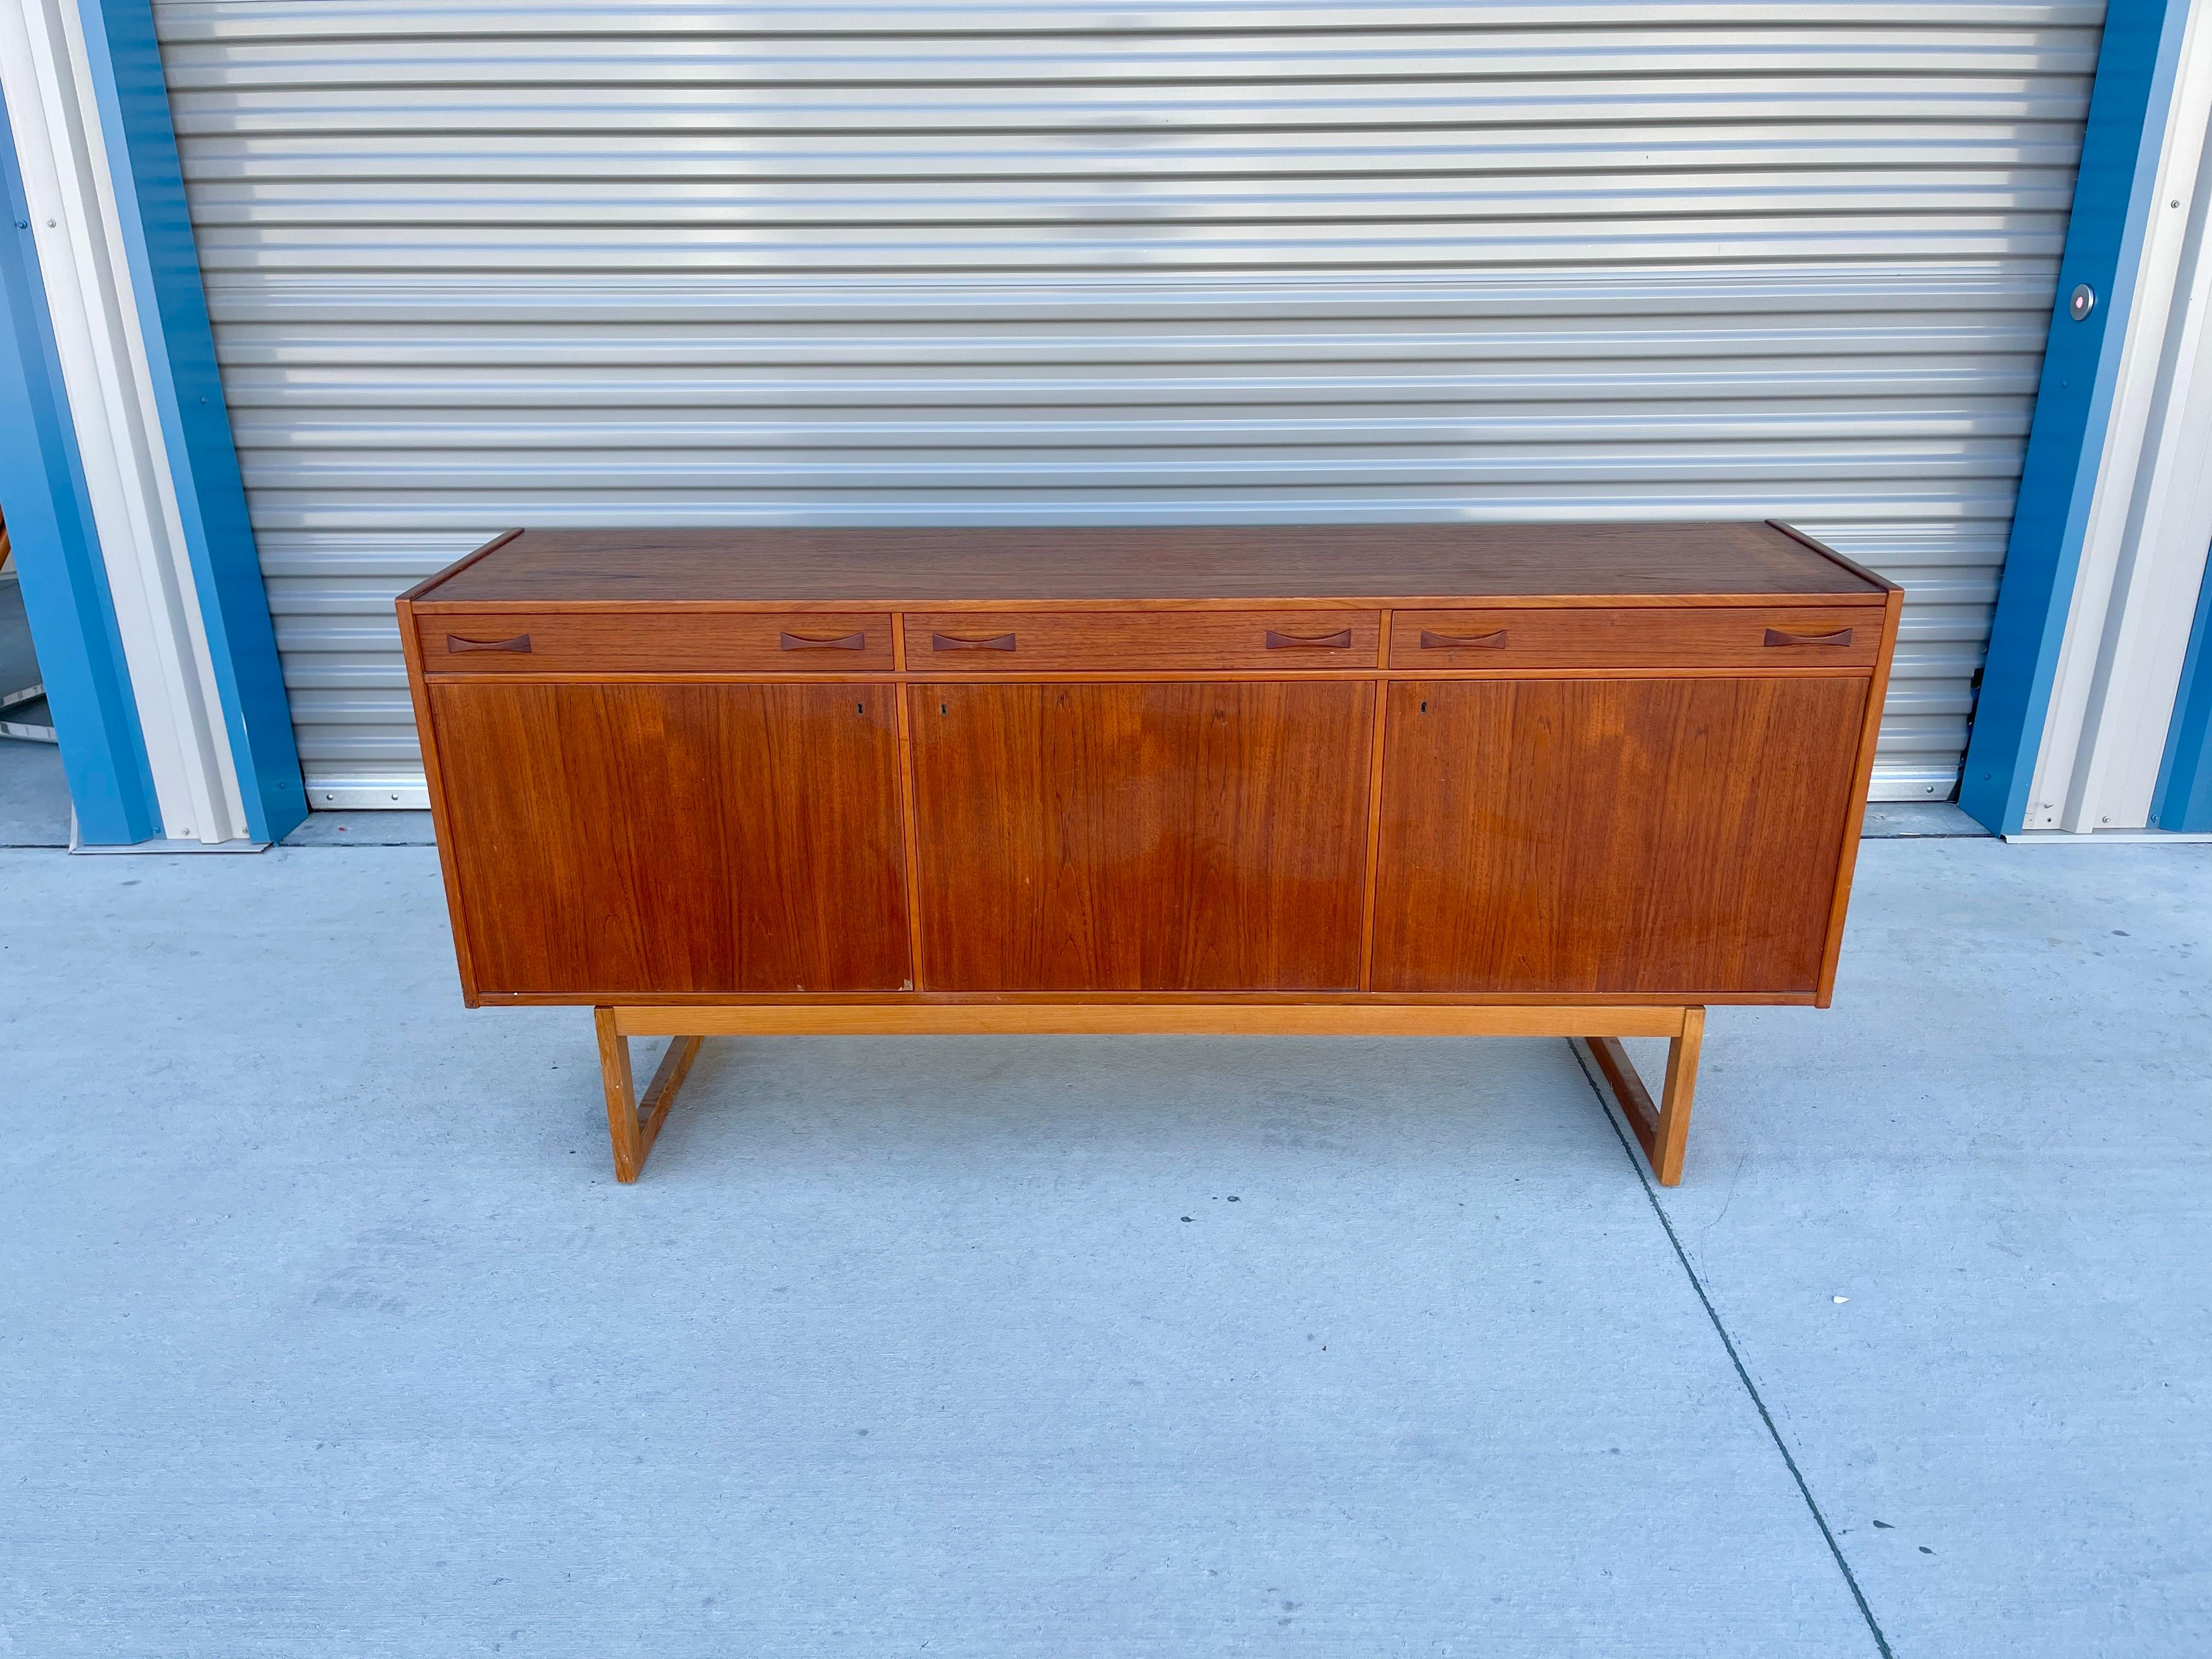 Stunning mid-century teak sideboard designed by Tage Olofsson for Ulferts Møbler in Sweden circa 1960s. This credenza features a solid teak frame with an excellent color tone and a beautiful grain pattern, creating a refined and elegant look. The